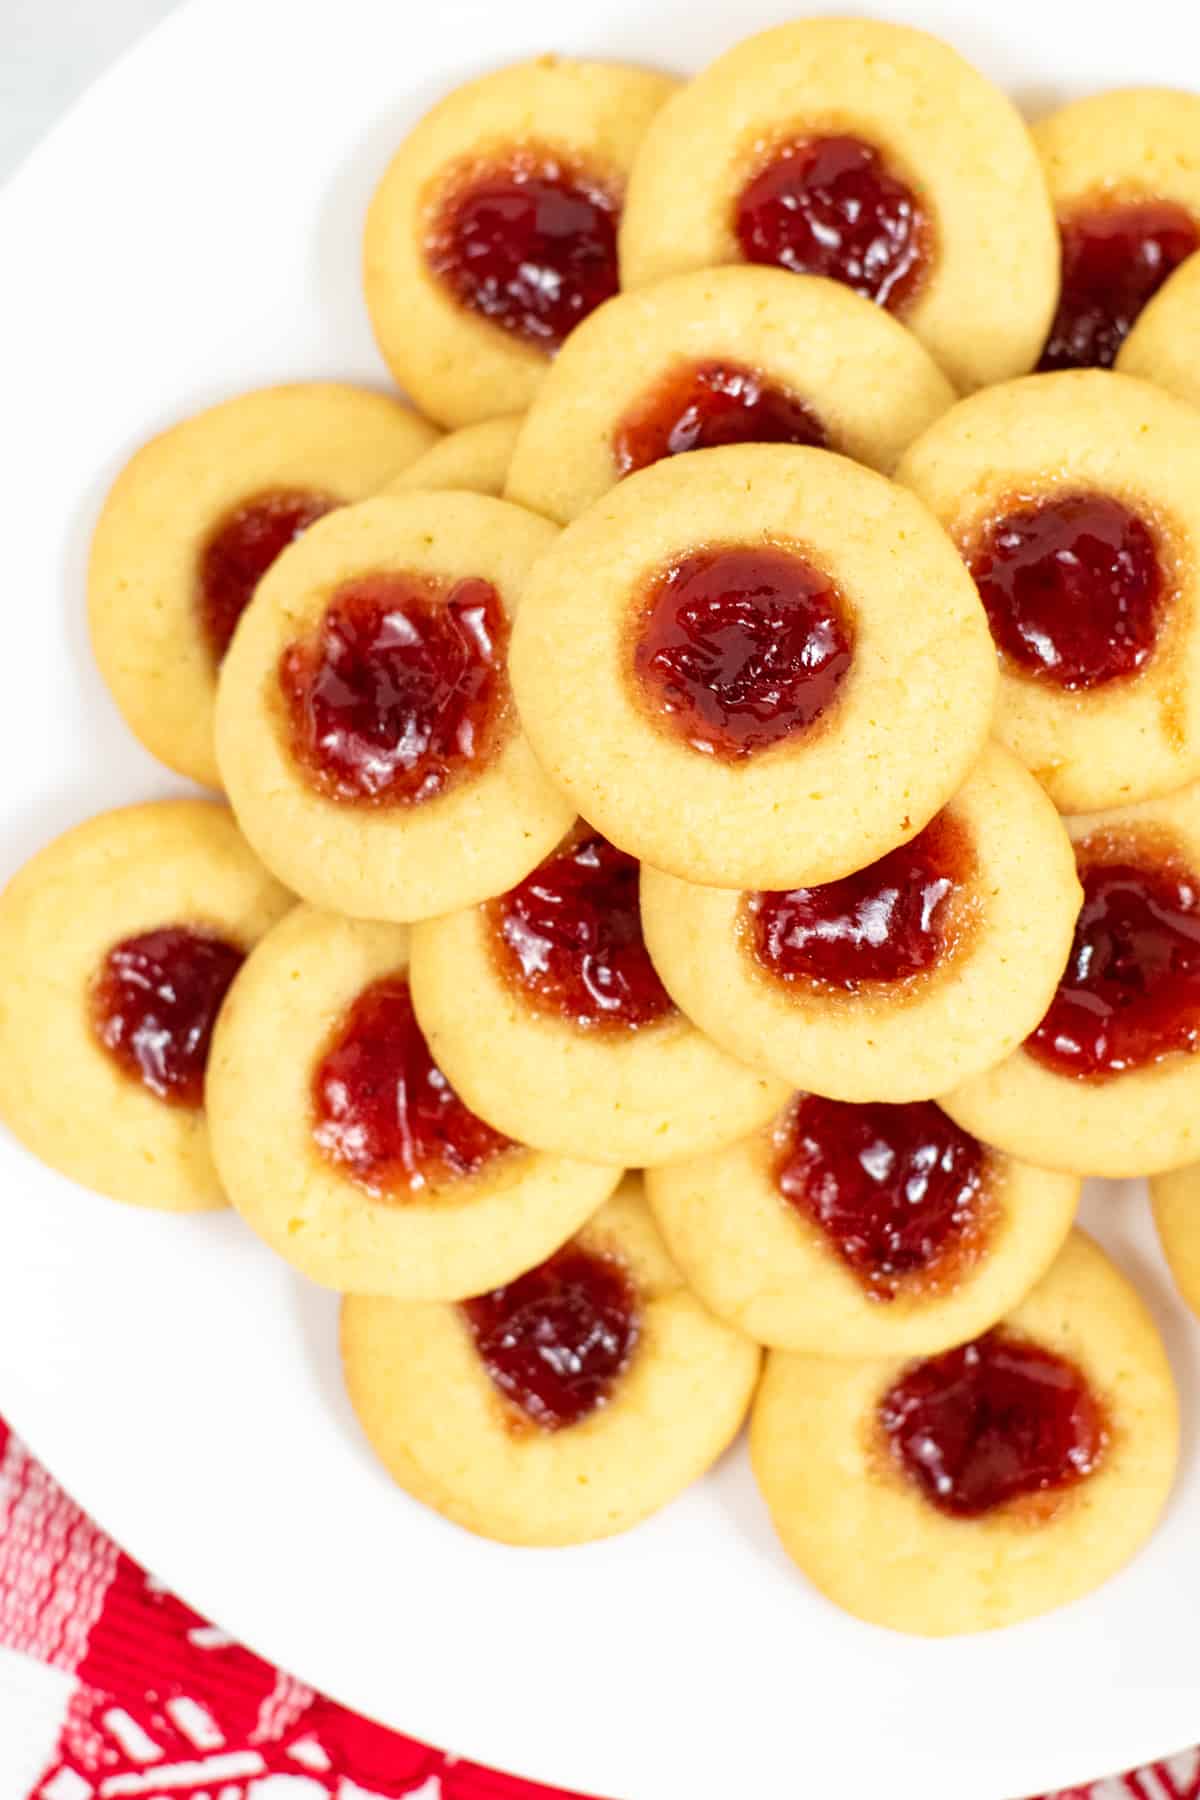 Top-down view of jam-filled thumbprint cookies stacked on white plate